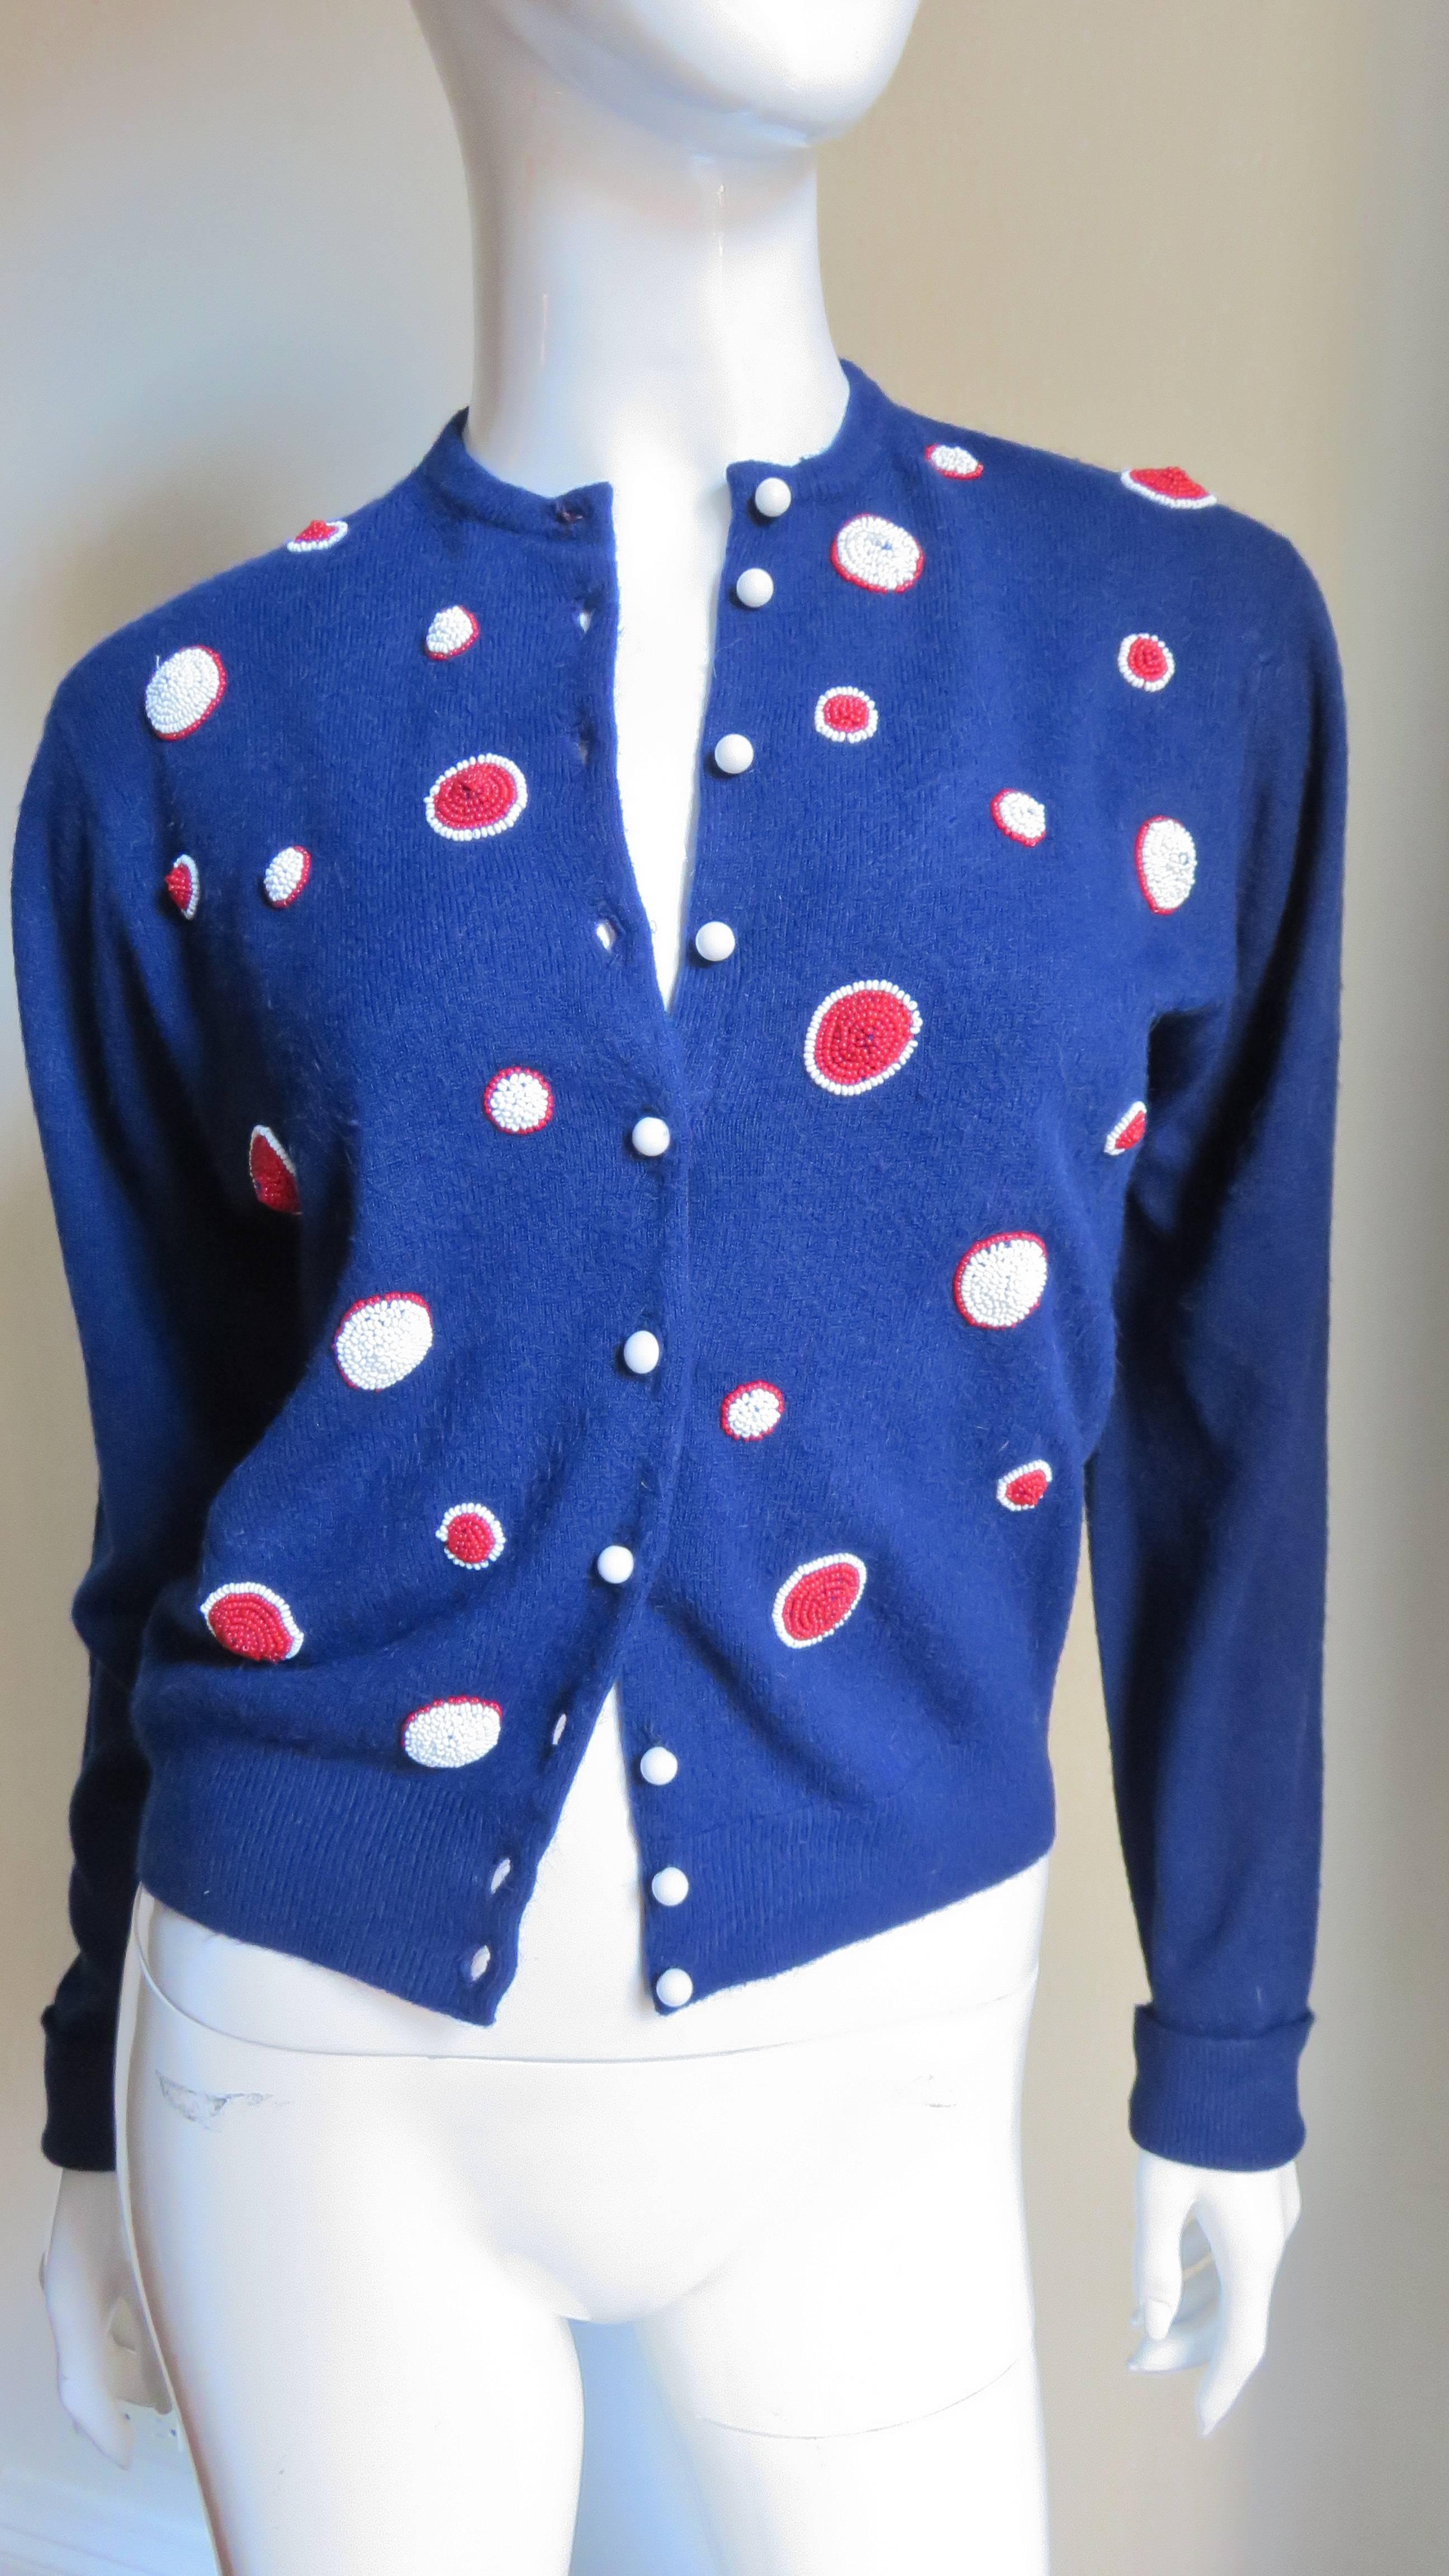 A beautiful beaded blue cashmere cardigan sweater from Elsa Schiaparelli.  The front is decorated with red glass beaded circles of different sizes outlined with white glass beads and the reverse with white beaded circles outlined in red beads all